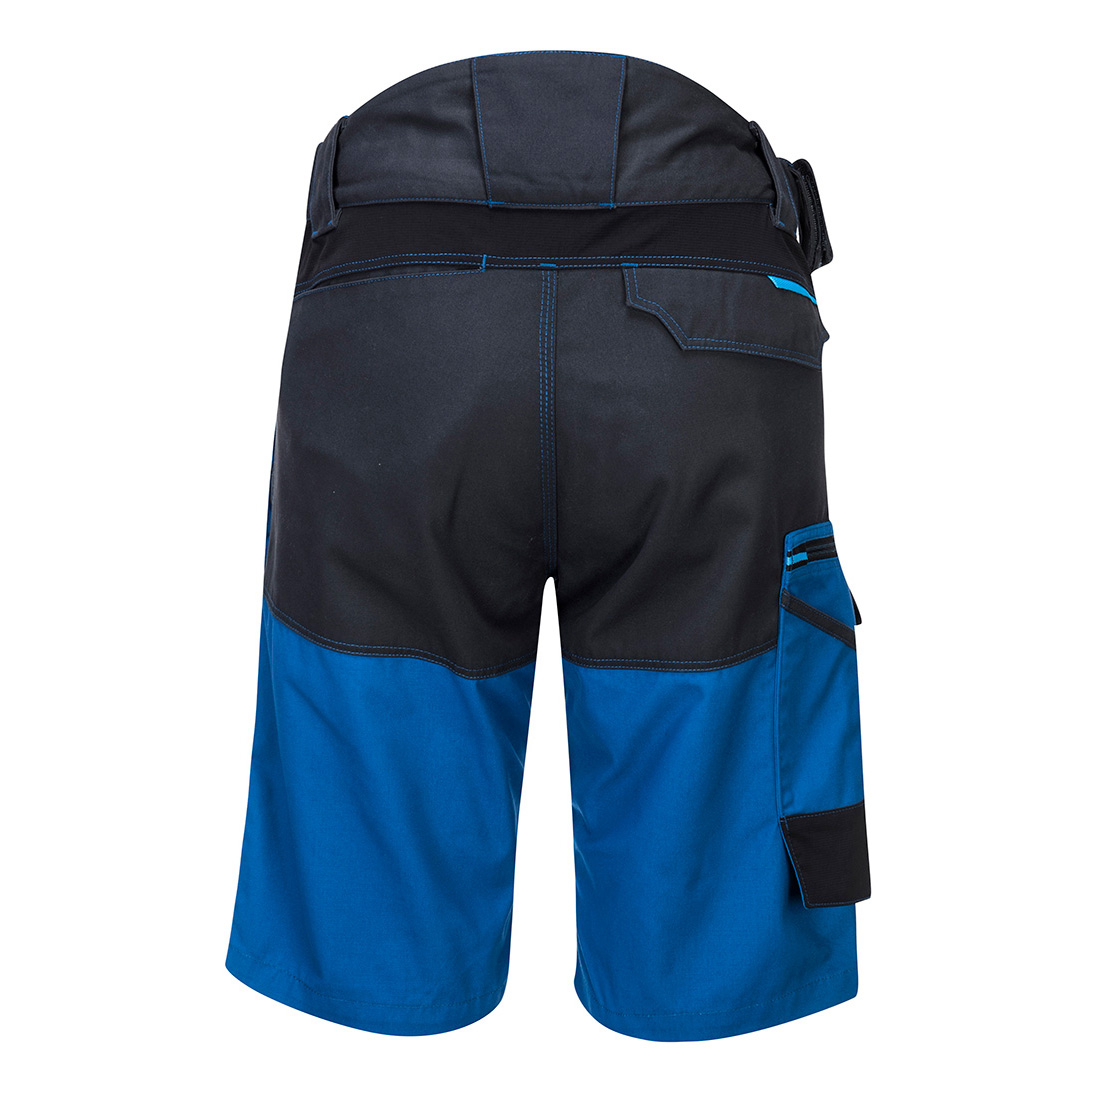 High Performance Durable Canvas Comfortable Shorts